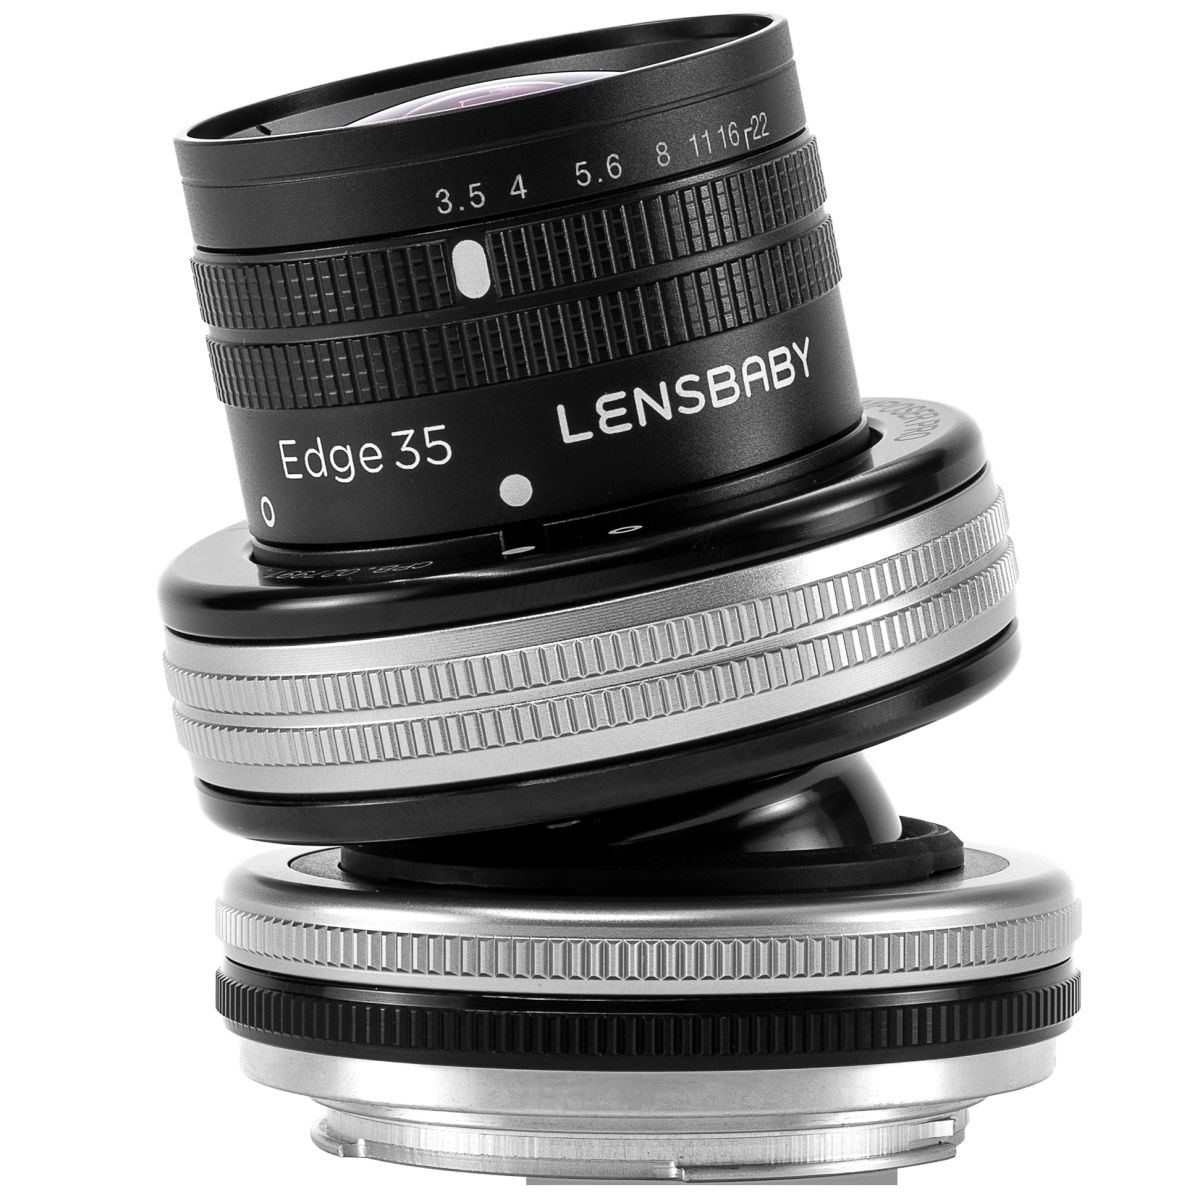 Lensbaby Composer Pro II + Sweet 35 Canon EF